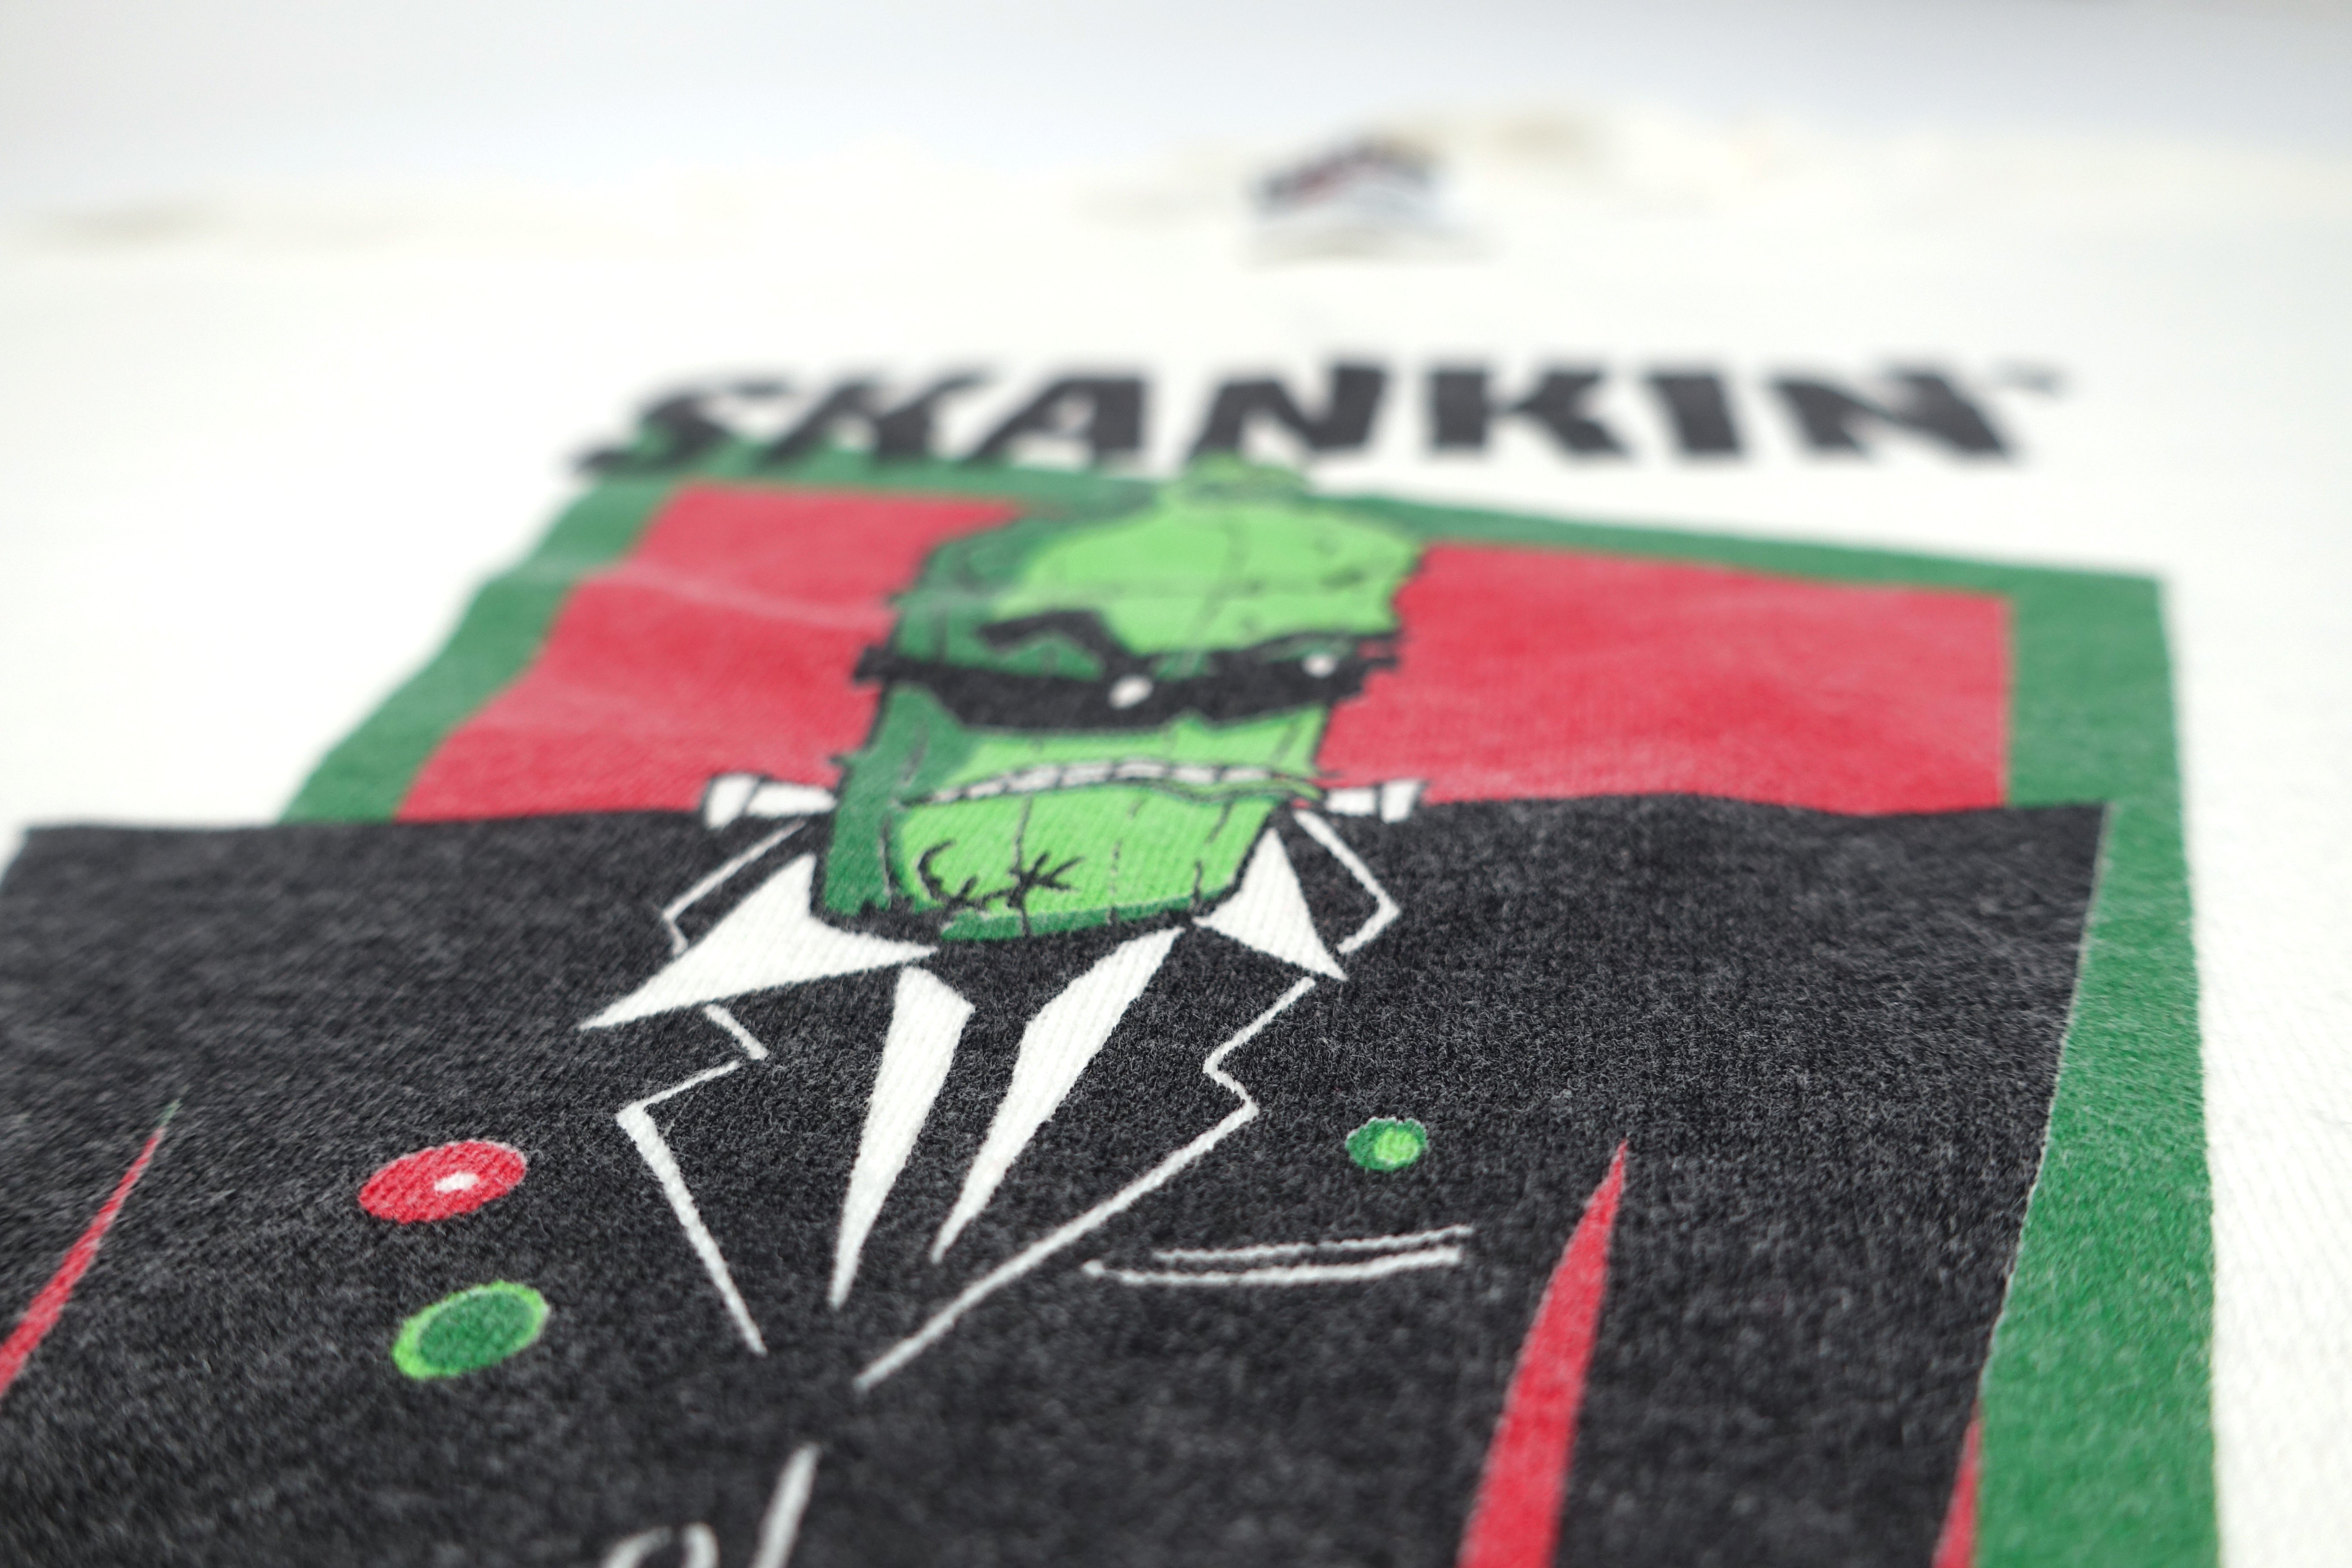 Skankin' Pickle ‎– Two Tone Pickle 90's Tour Shirt Size Large